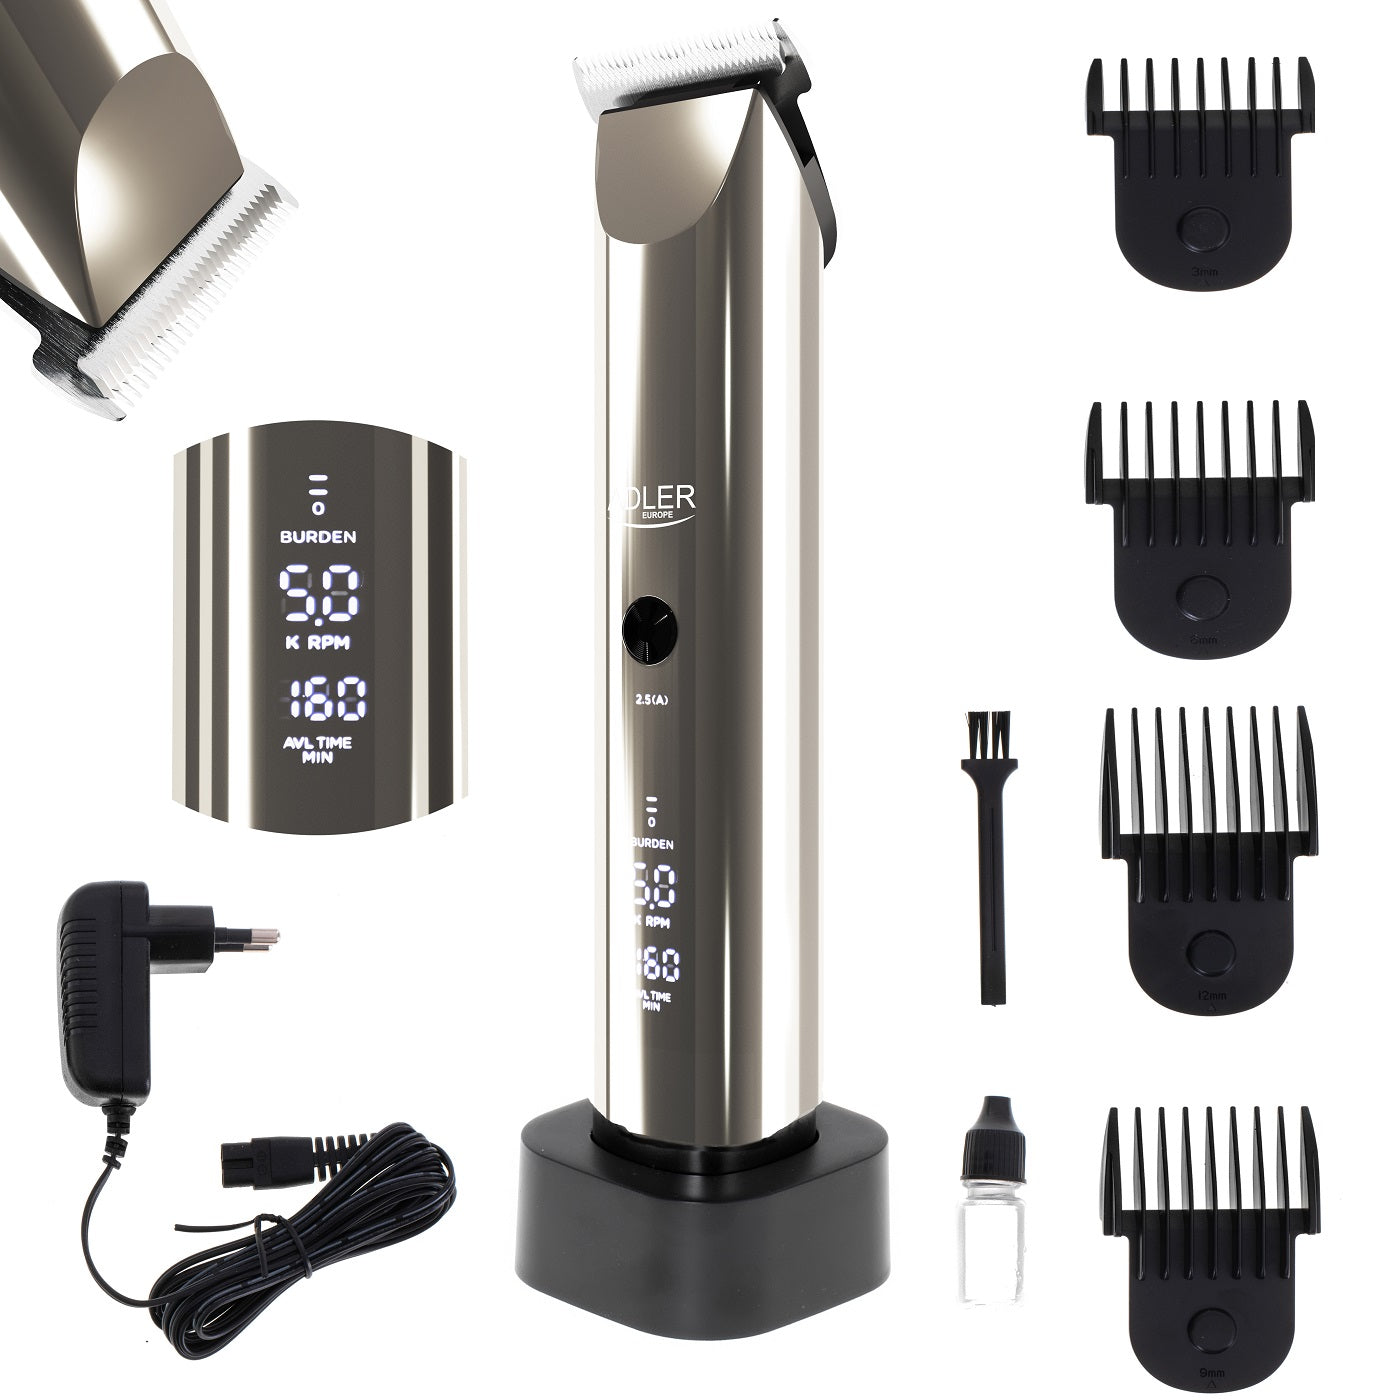 Adler AD2834 Hair Clipper With LCD Display